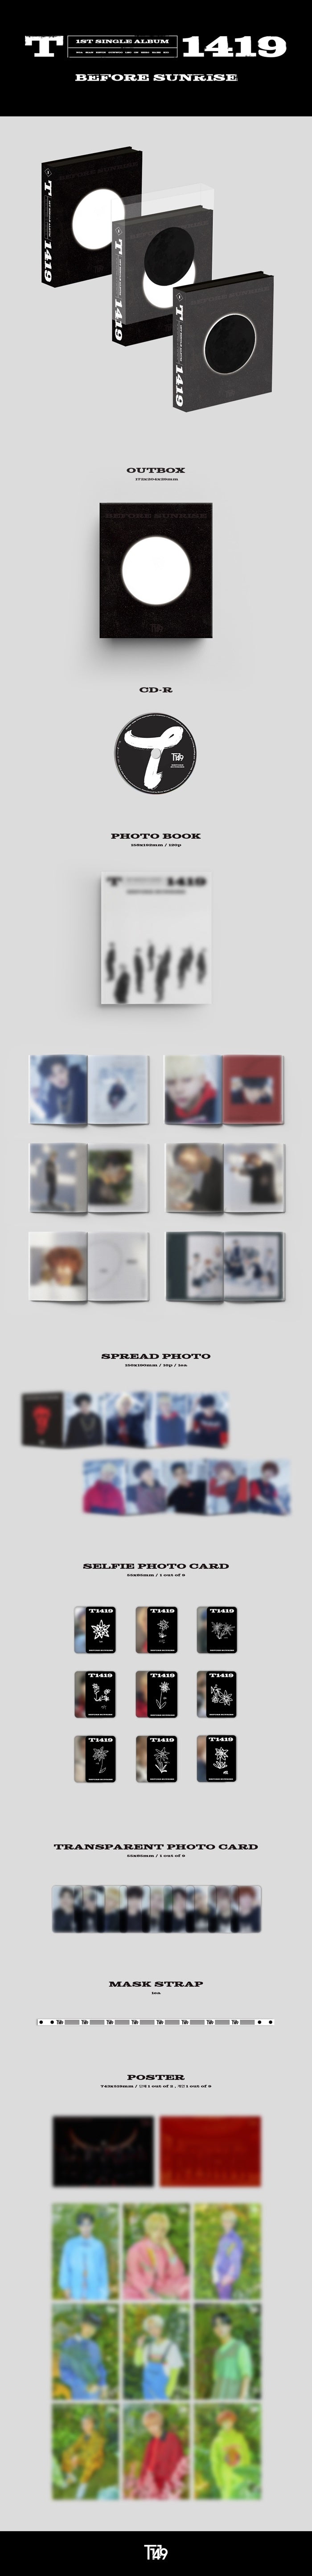 1 CD
1 Photobook (120 pages)
1 Spread Photo
1 Selfie Photocard (random out of 9 types)
1 Transparent Photo Card
1 Mask Strap